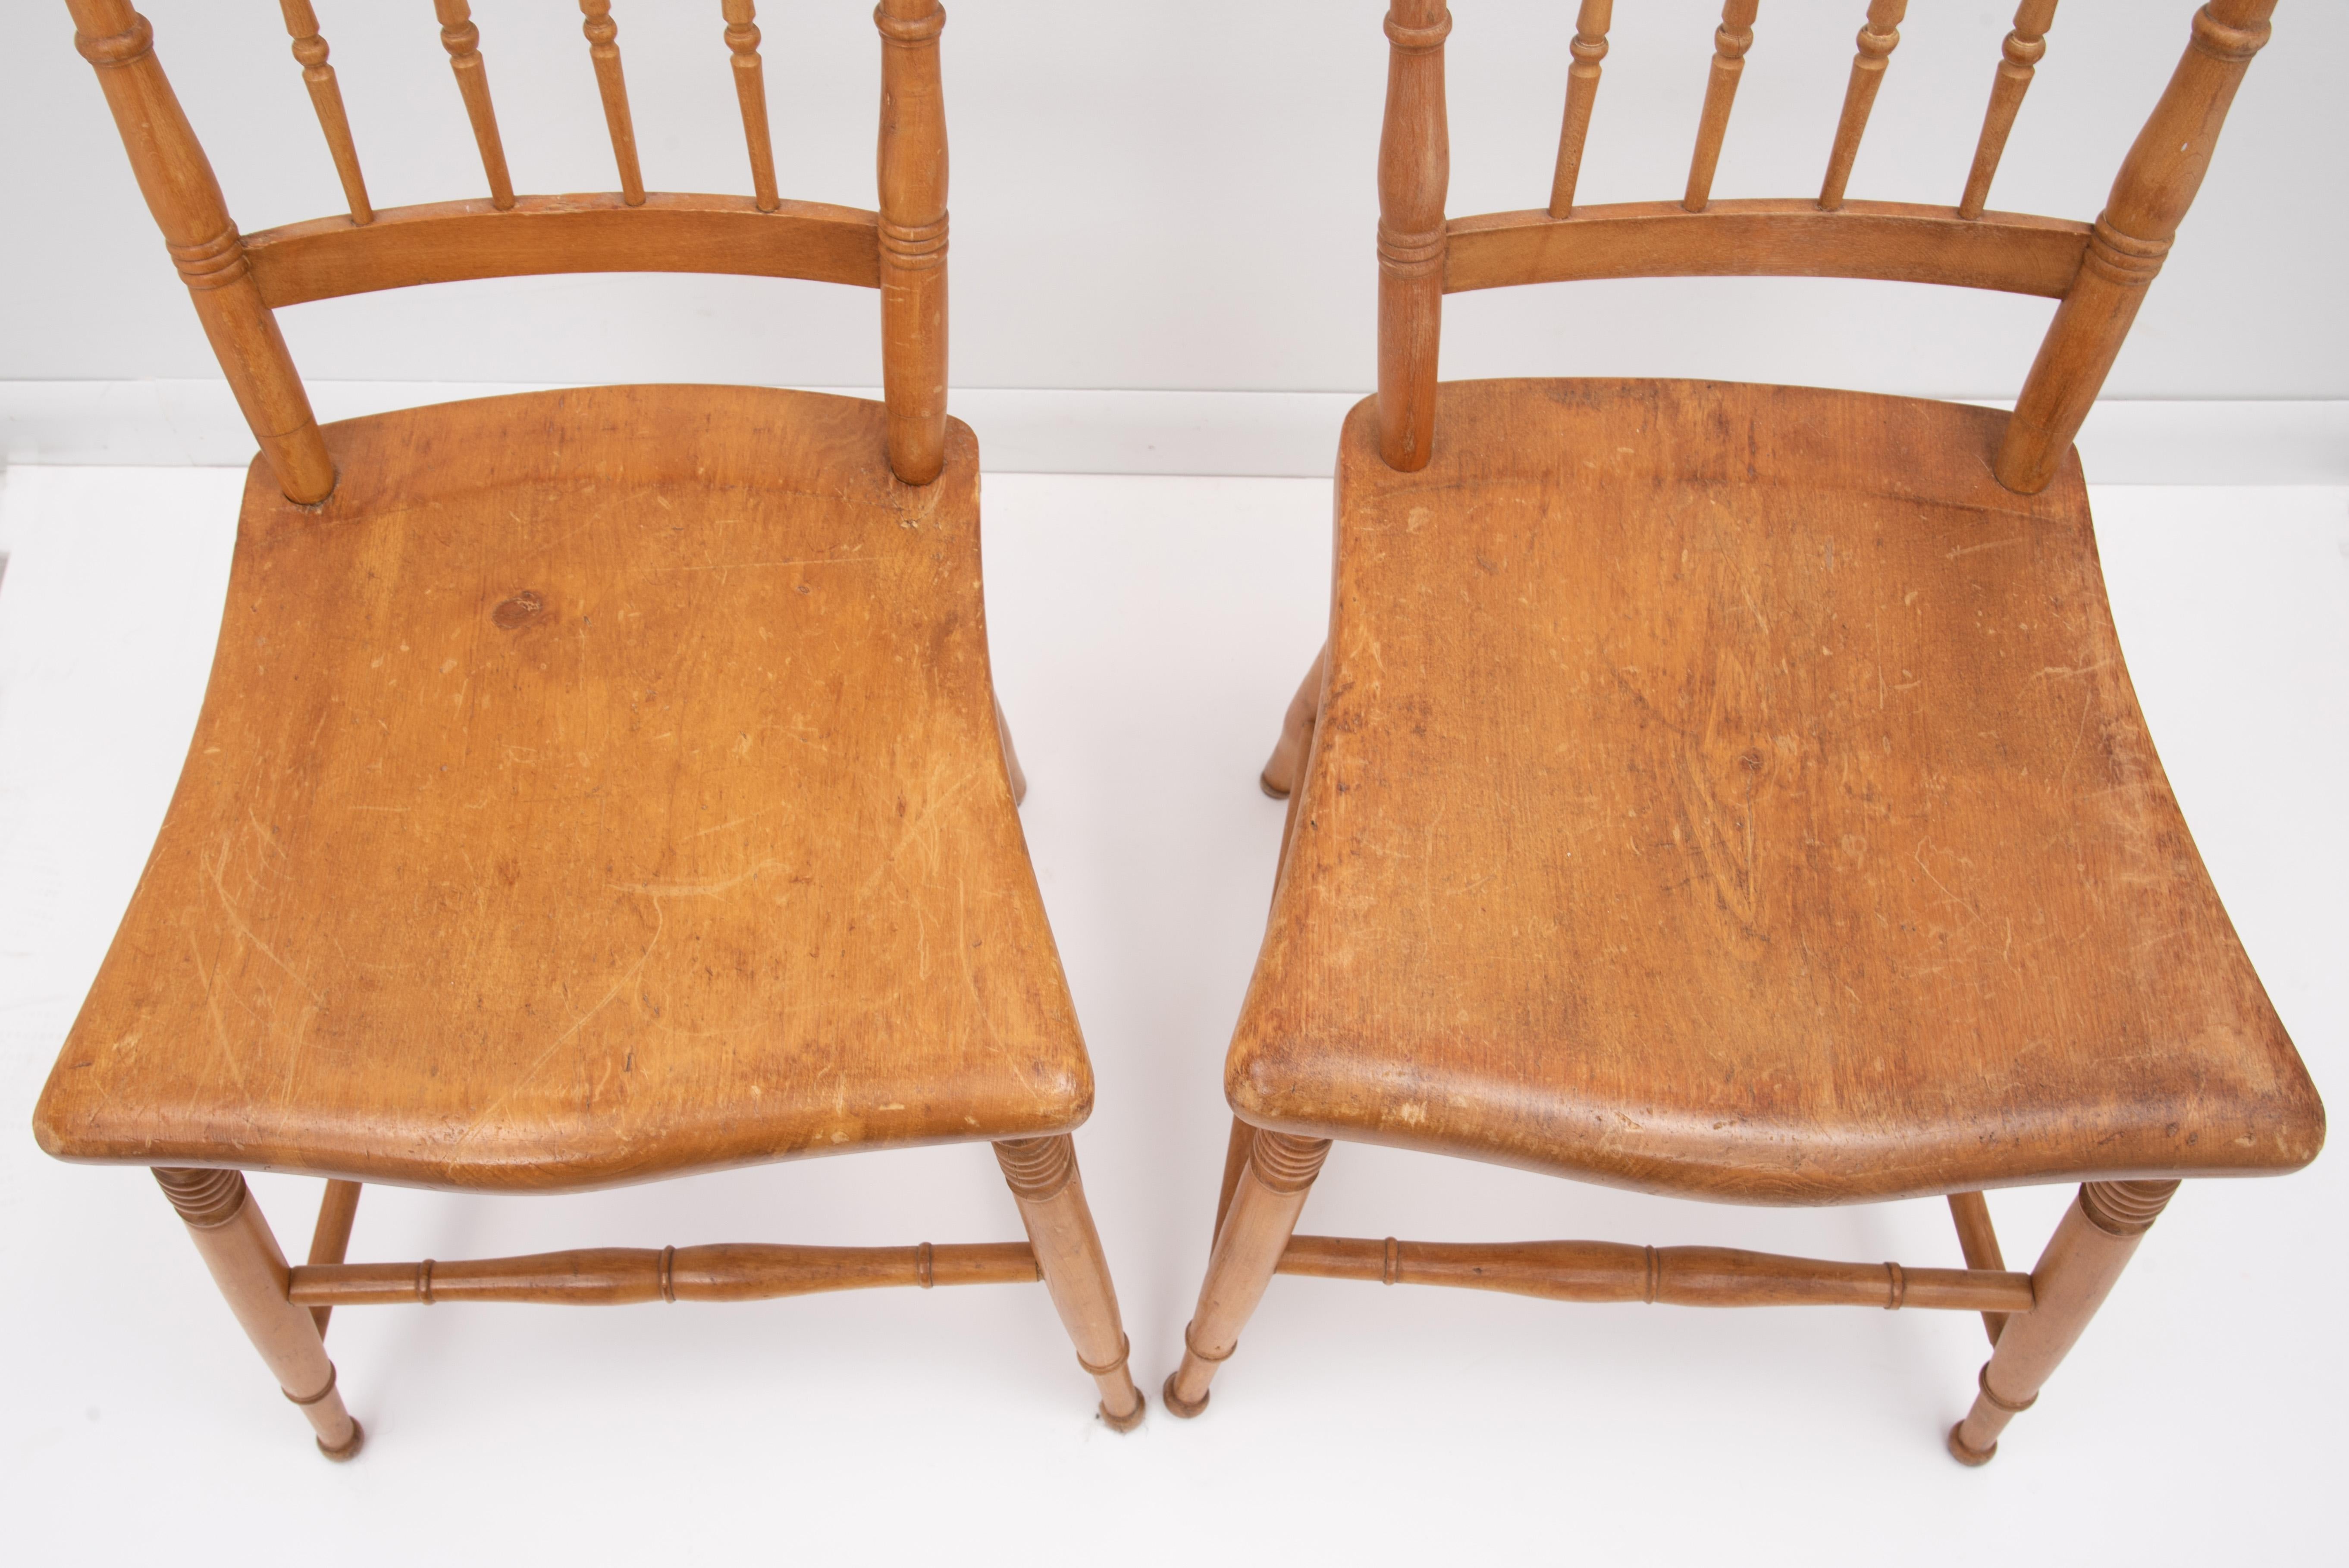 English Scrubbed Pine Plank Seat Dining Chairs Farmhouse Cottage, a Set of Four For Sale 4